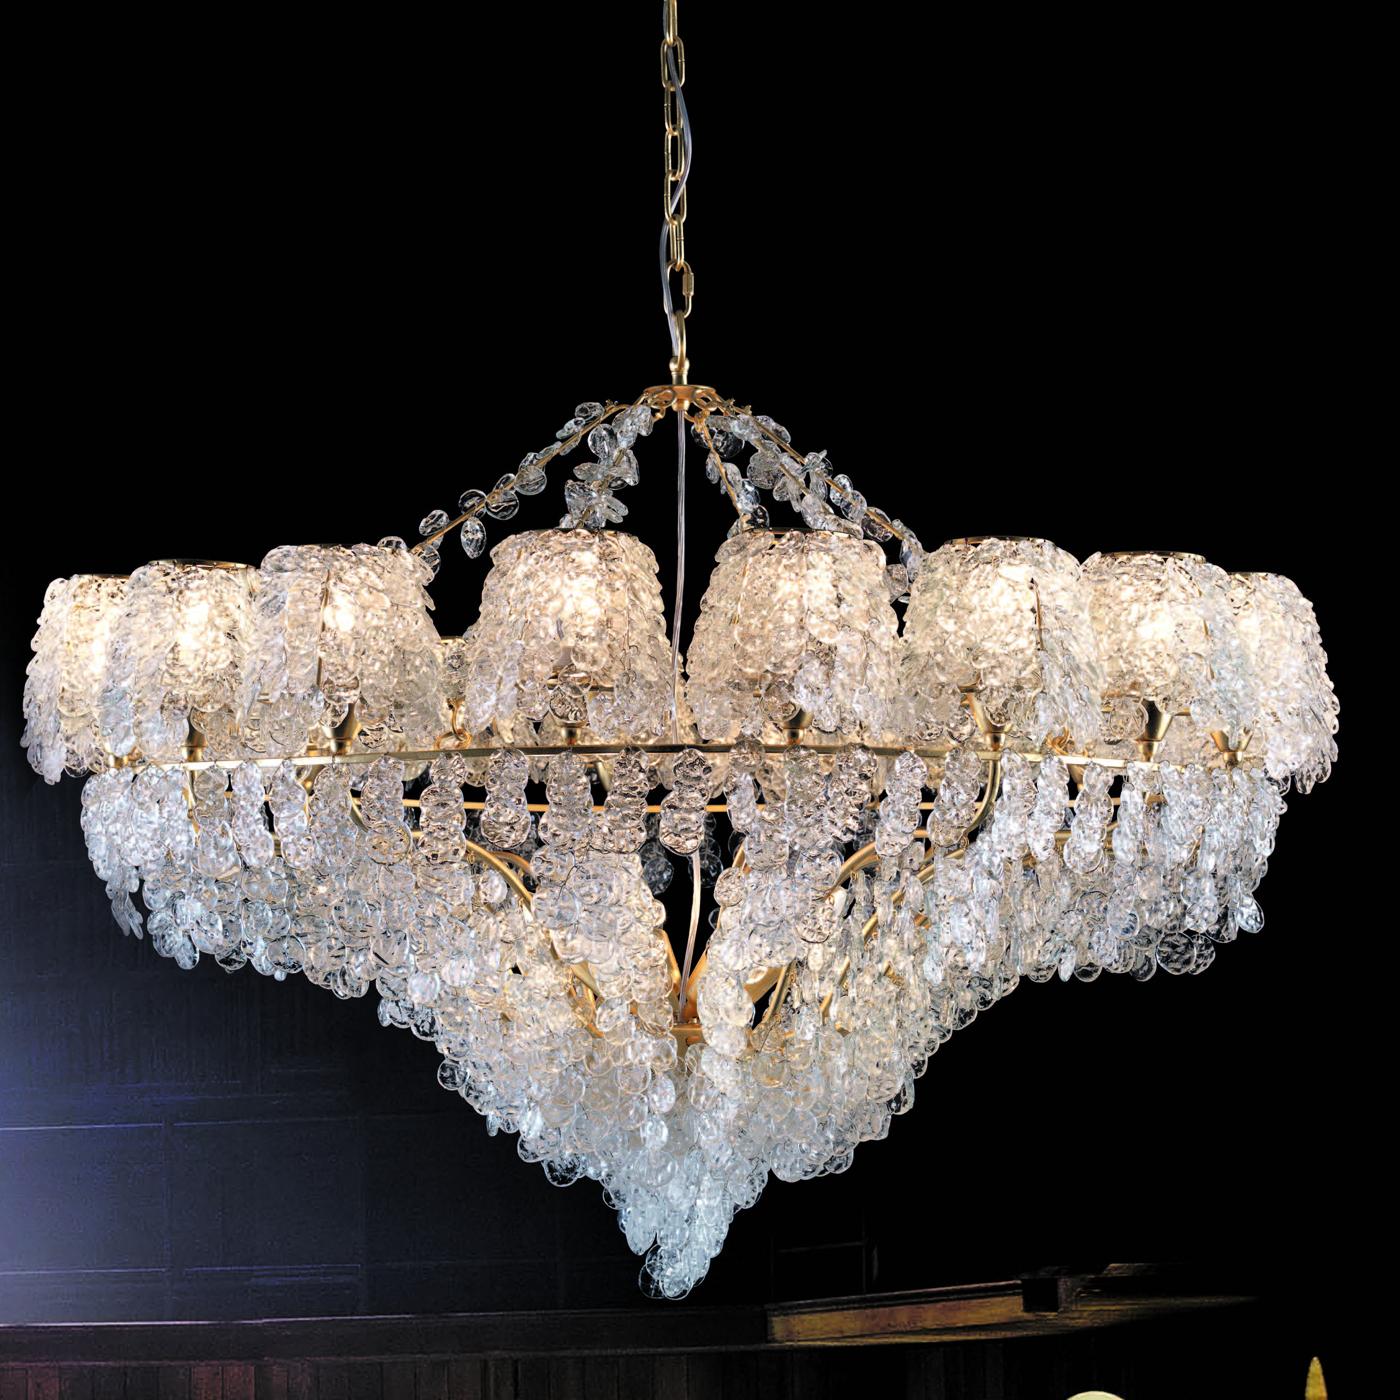 Entirely covered with highly-reflective glass pendants that are meticulously hand-tied by expert artisans, this splendid chandelier comprises a tiered metal frame covered with gold leaf that showcases 18 ES bulbs (G9 max 33W each) distributed on the